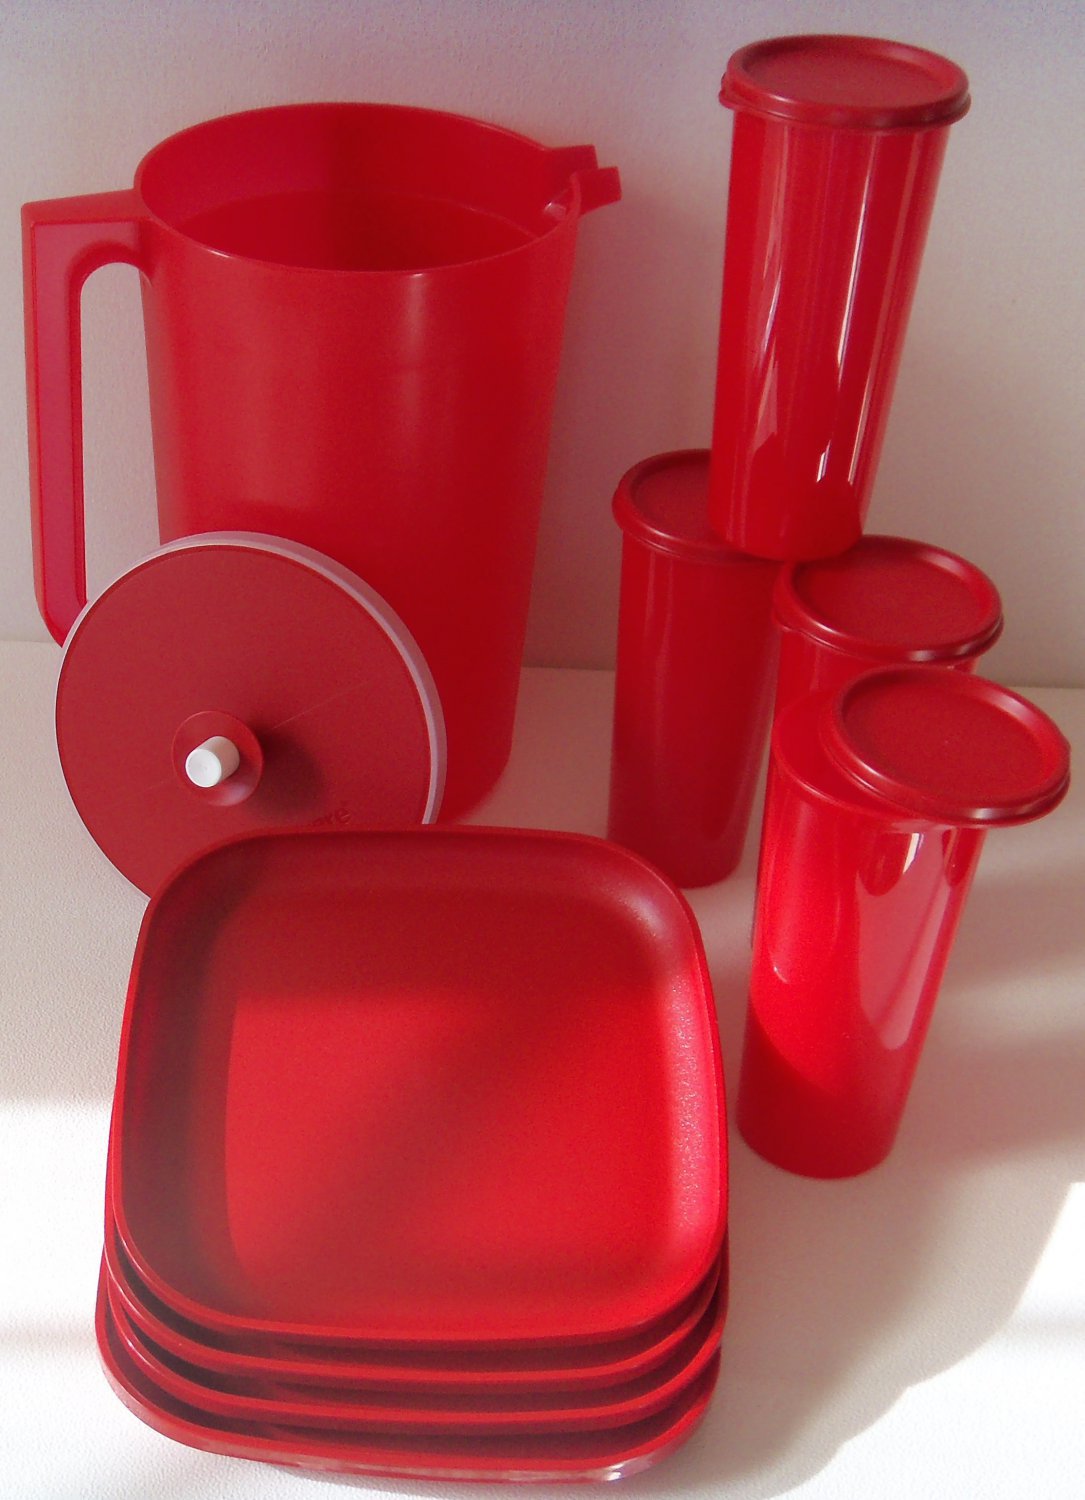 Tupperware Red 8" square Luncheon Plates, 1 Gallon Pitcher, 16 Ounce Tumblers